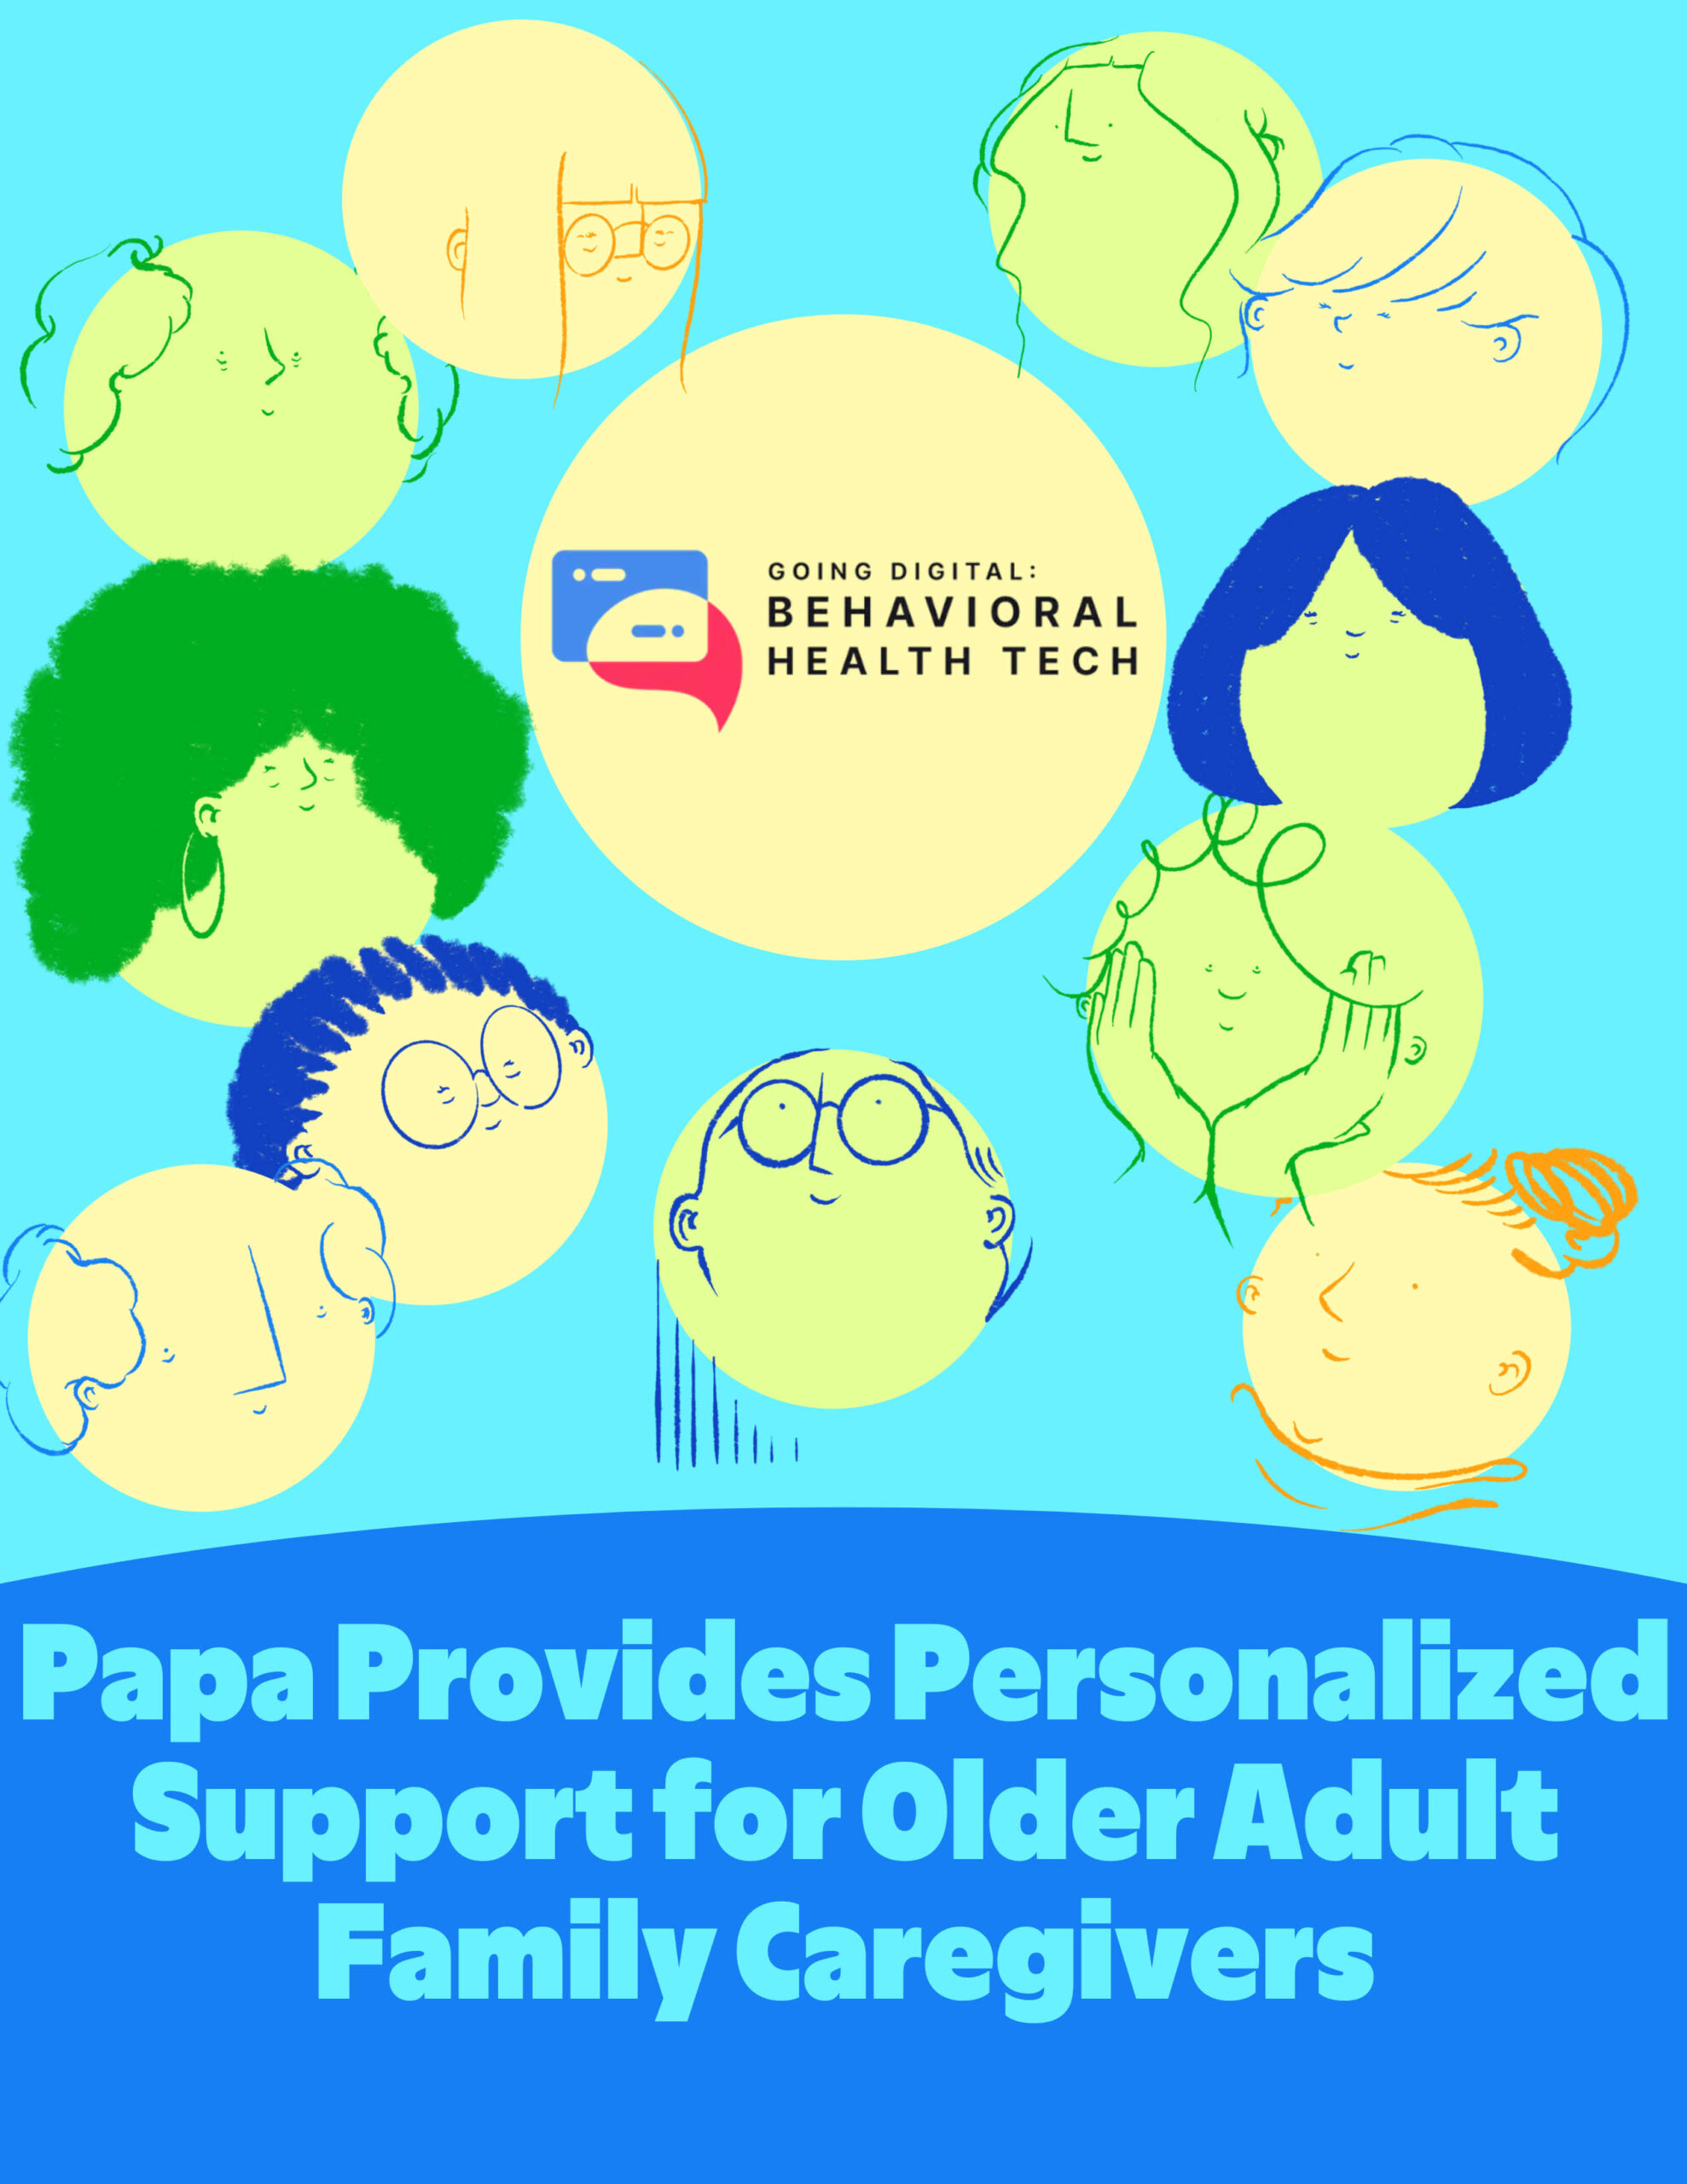 Papa provides personalized support for older adult family caregivers infographic.